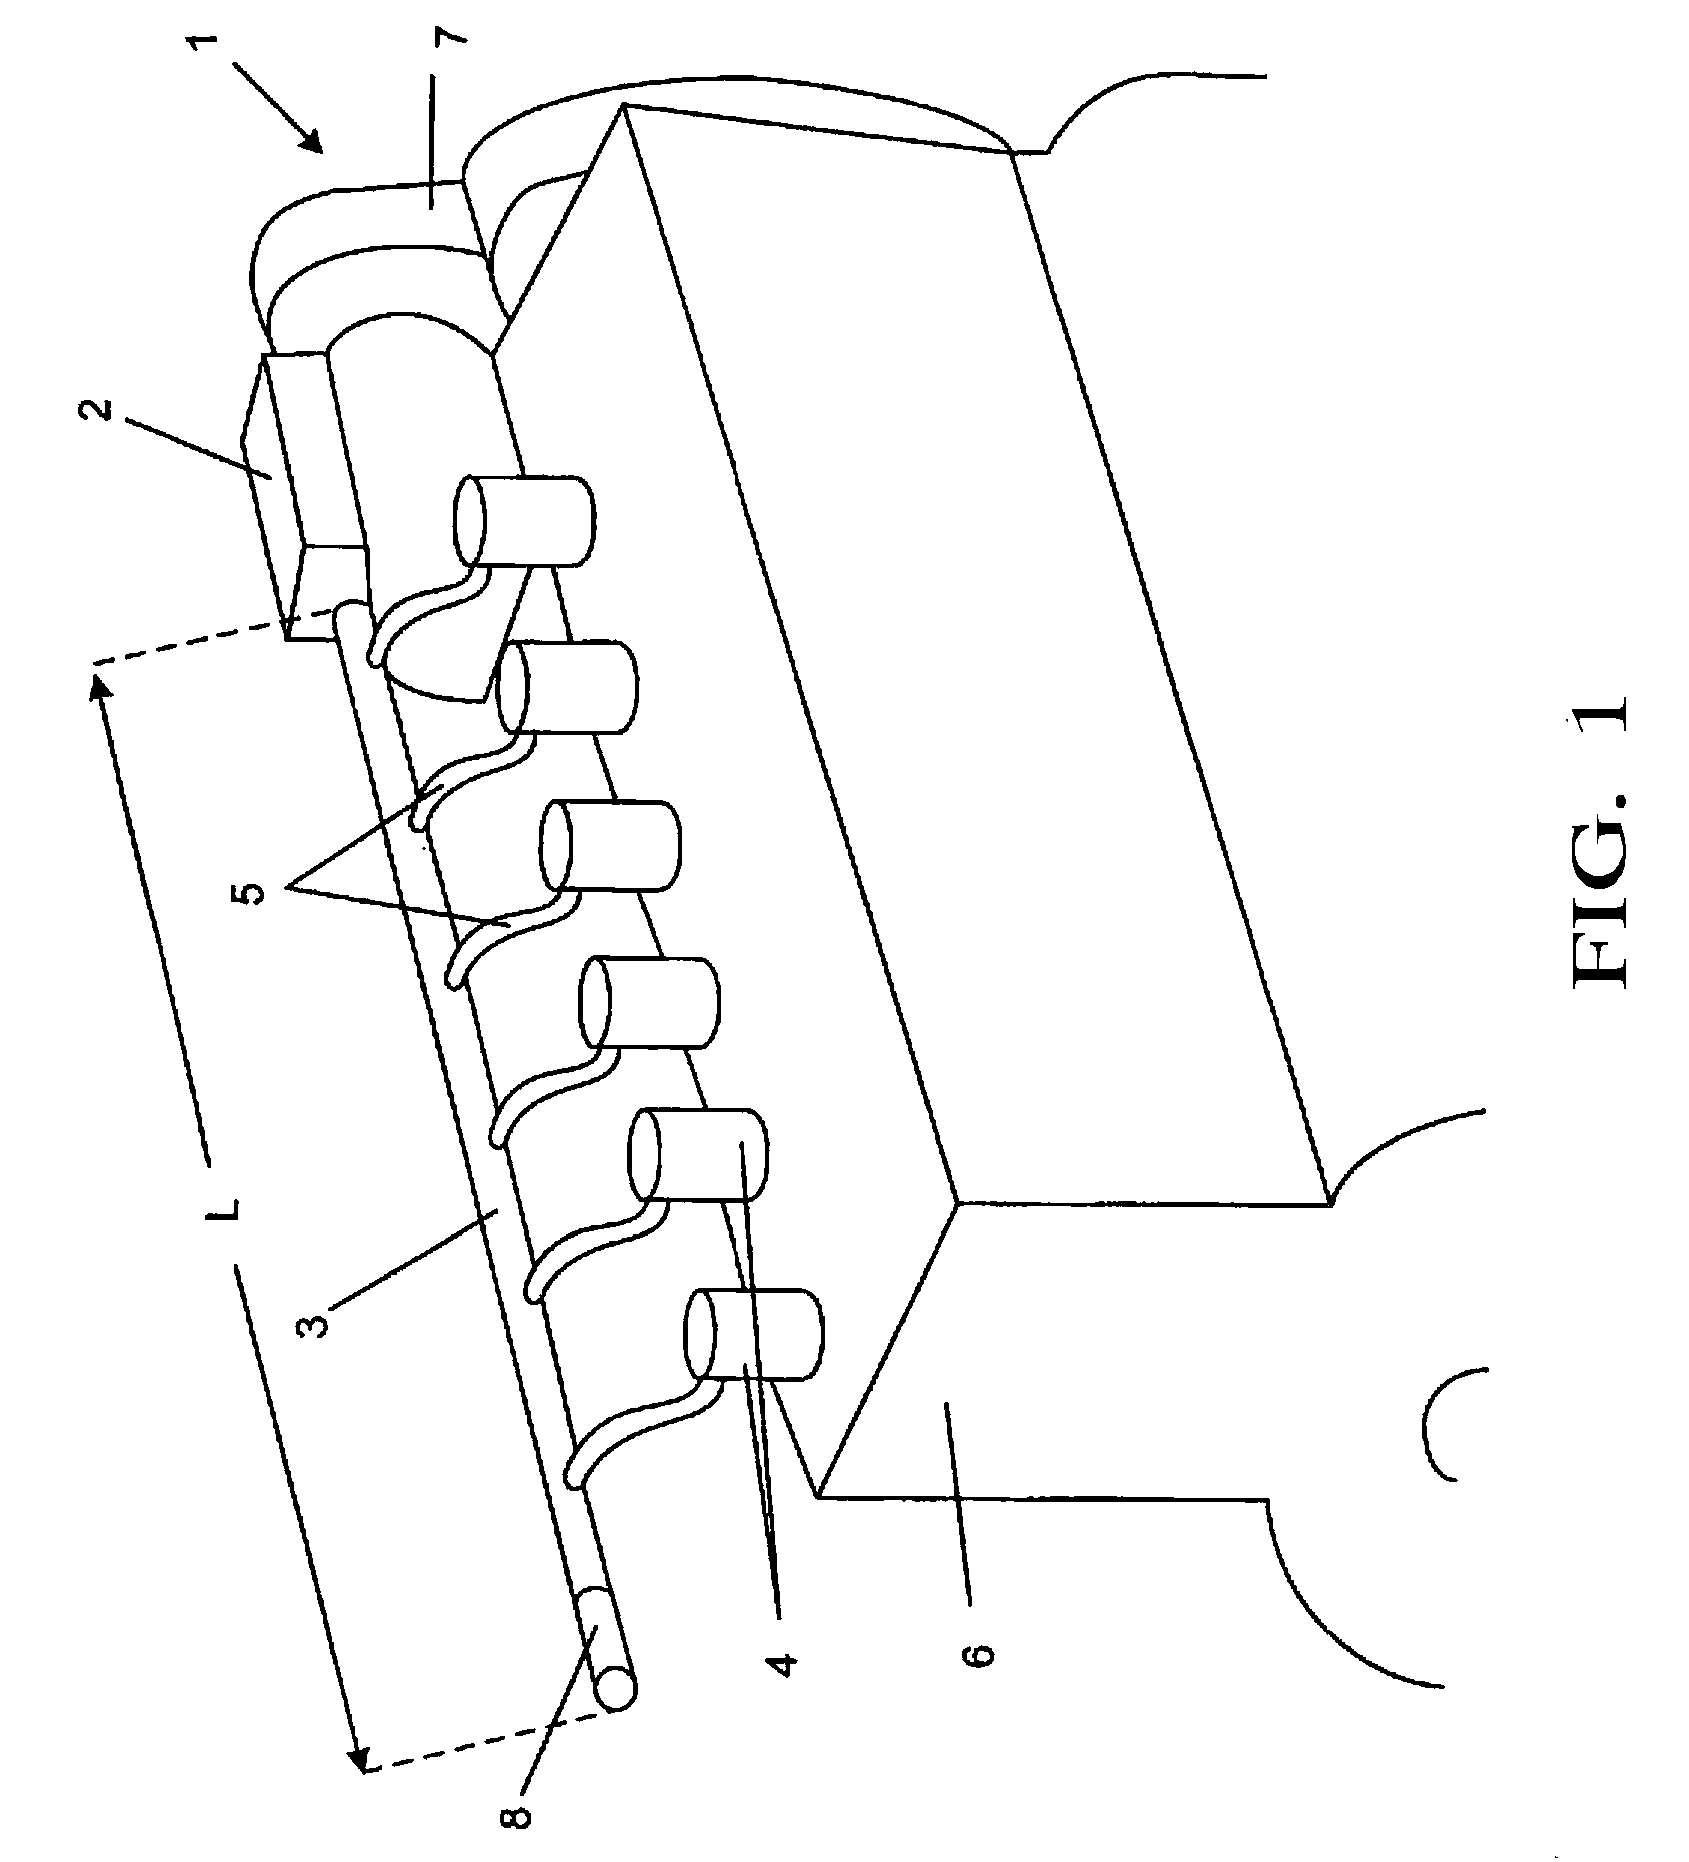 Fuel composition estimation and control of fuel injection